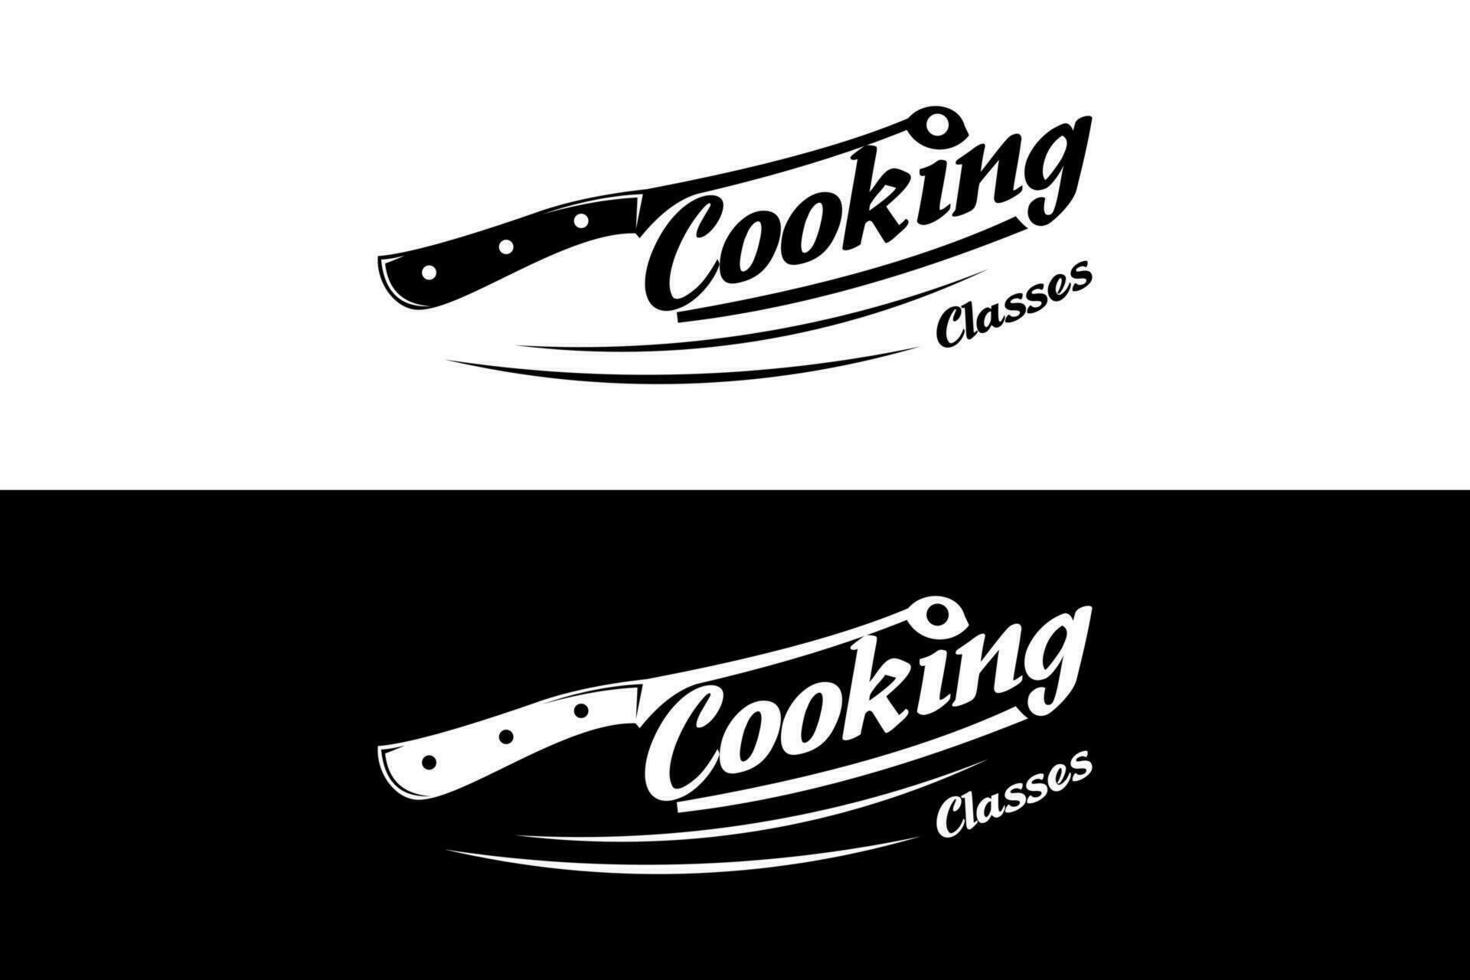 Cooking class logo design with chef knife concept, chef knife logo template vector